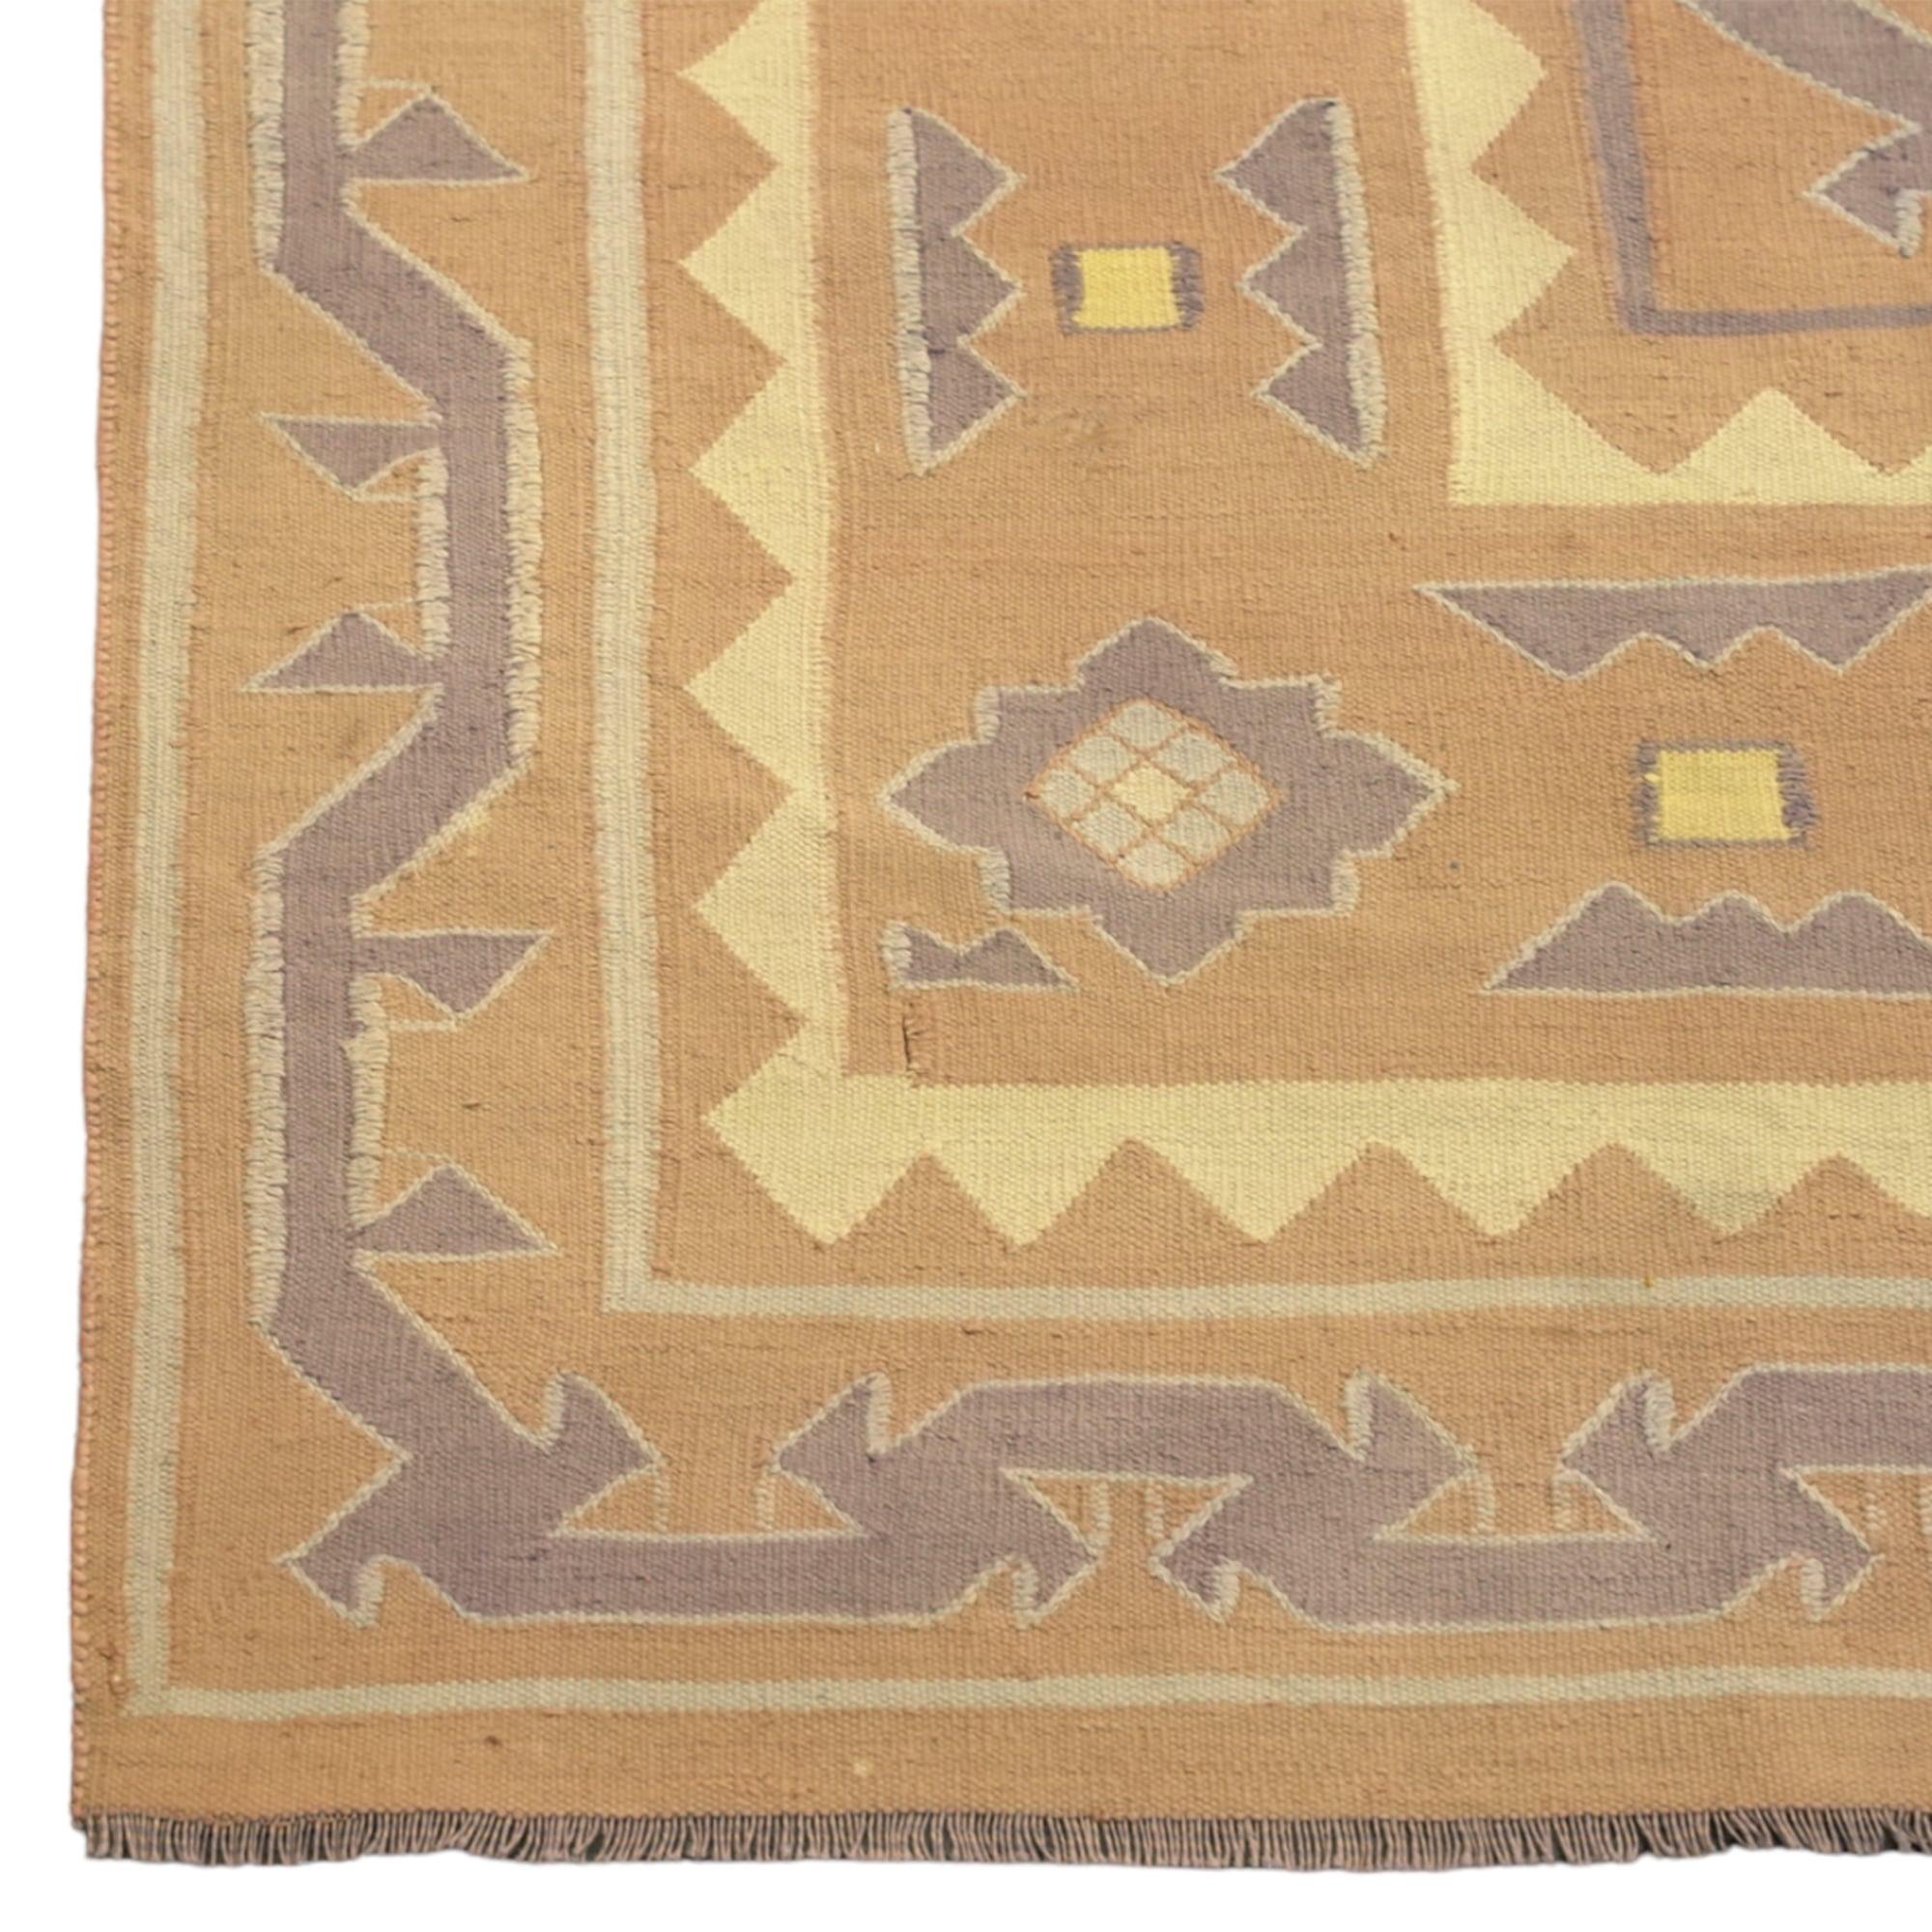 Hand-Woven Vintage Dhurrie Rug in Brown with Mauve Geometric Patterns, from Rug & Kilim For Sale